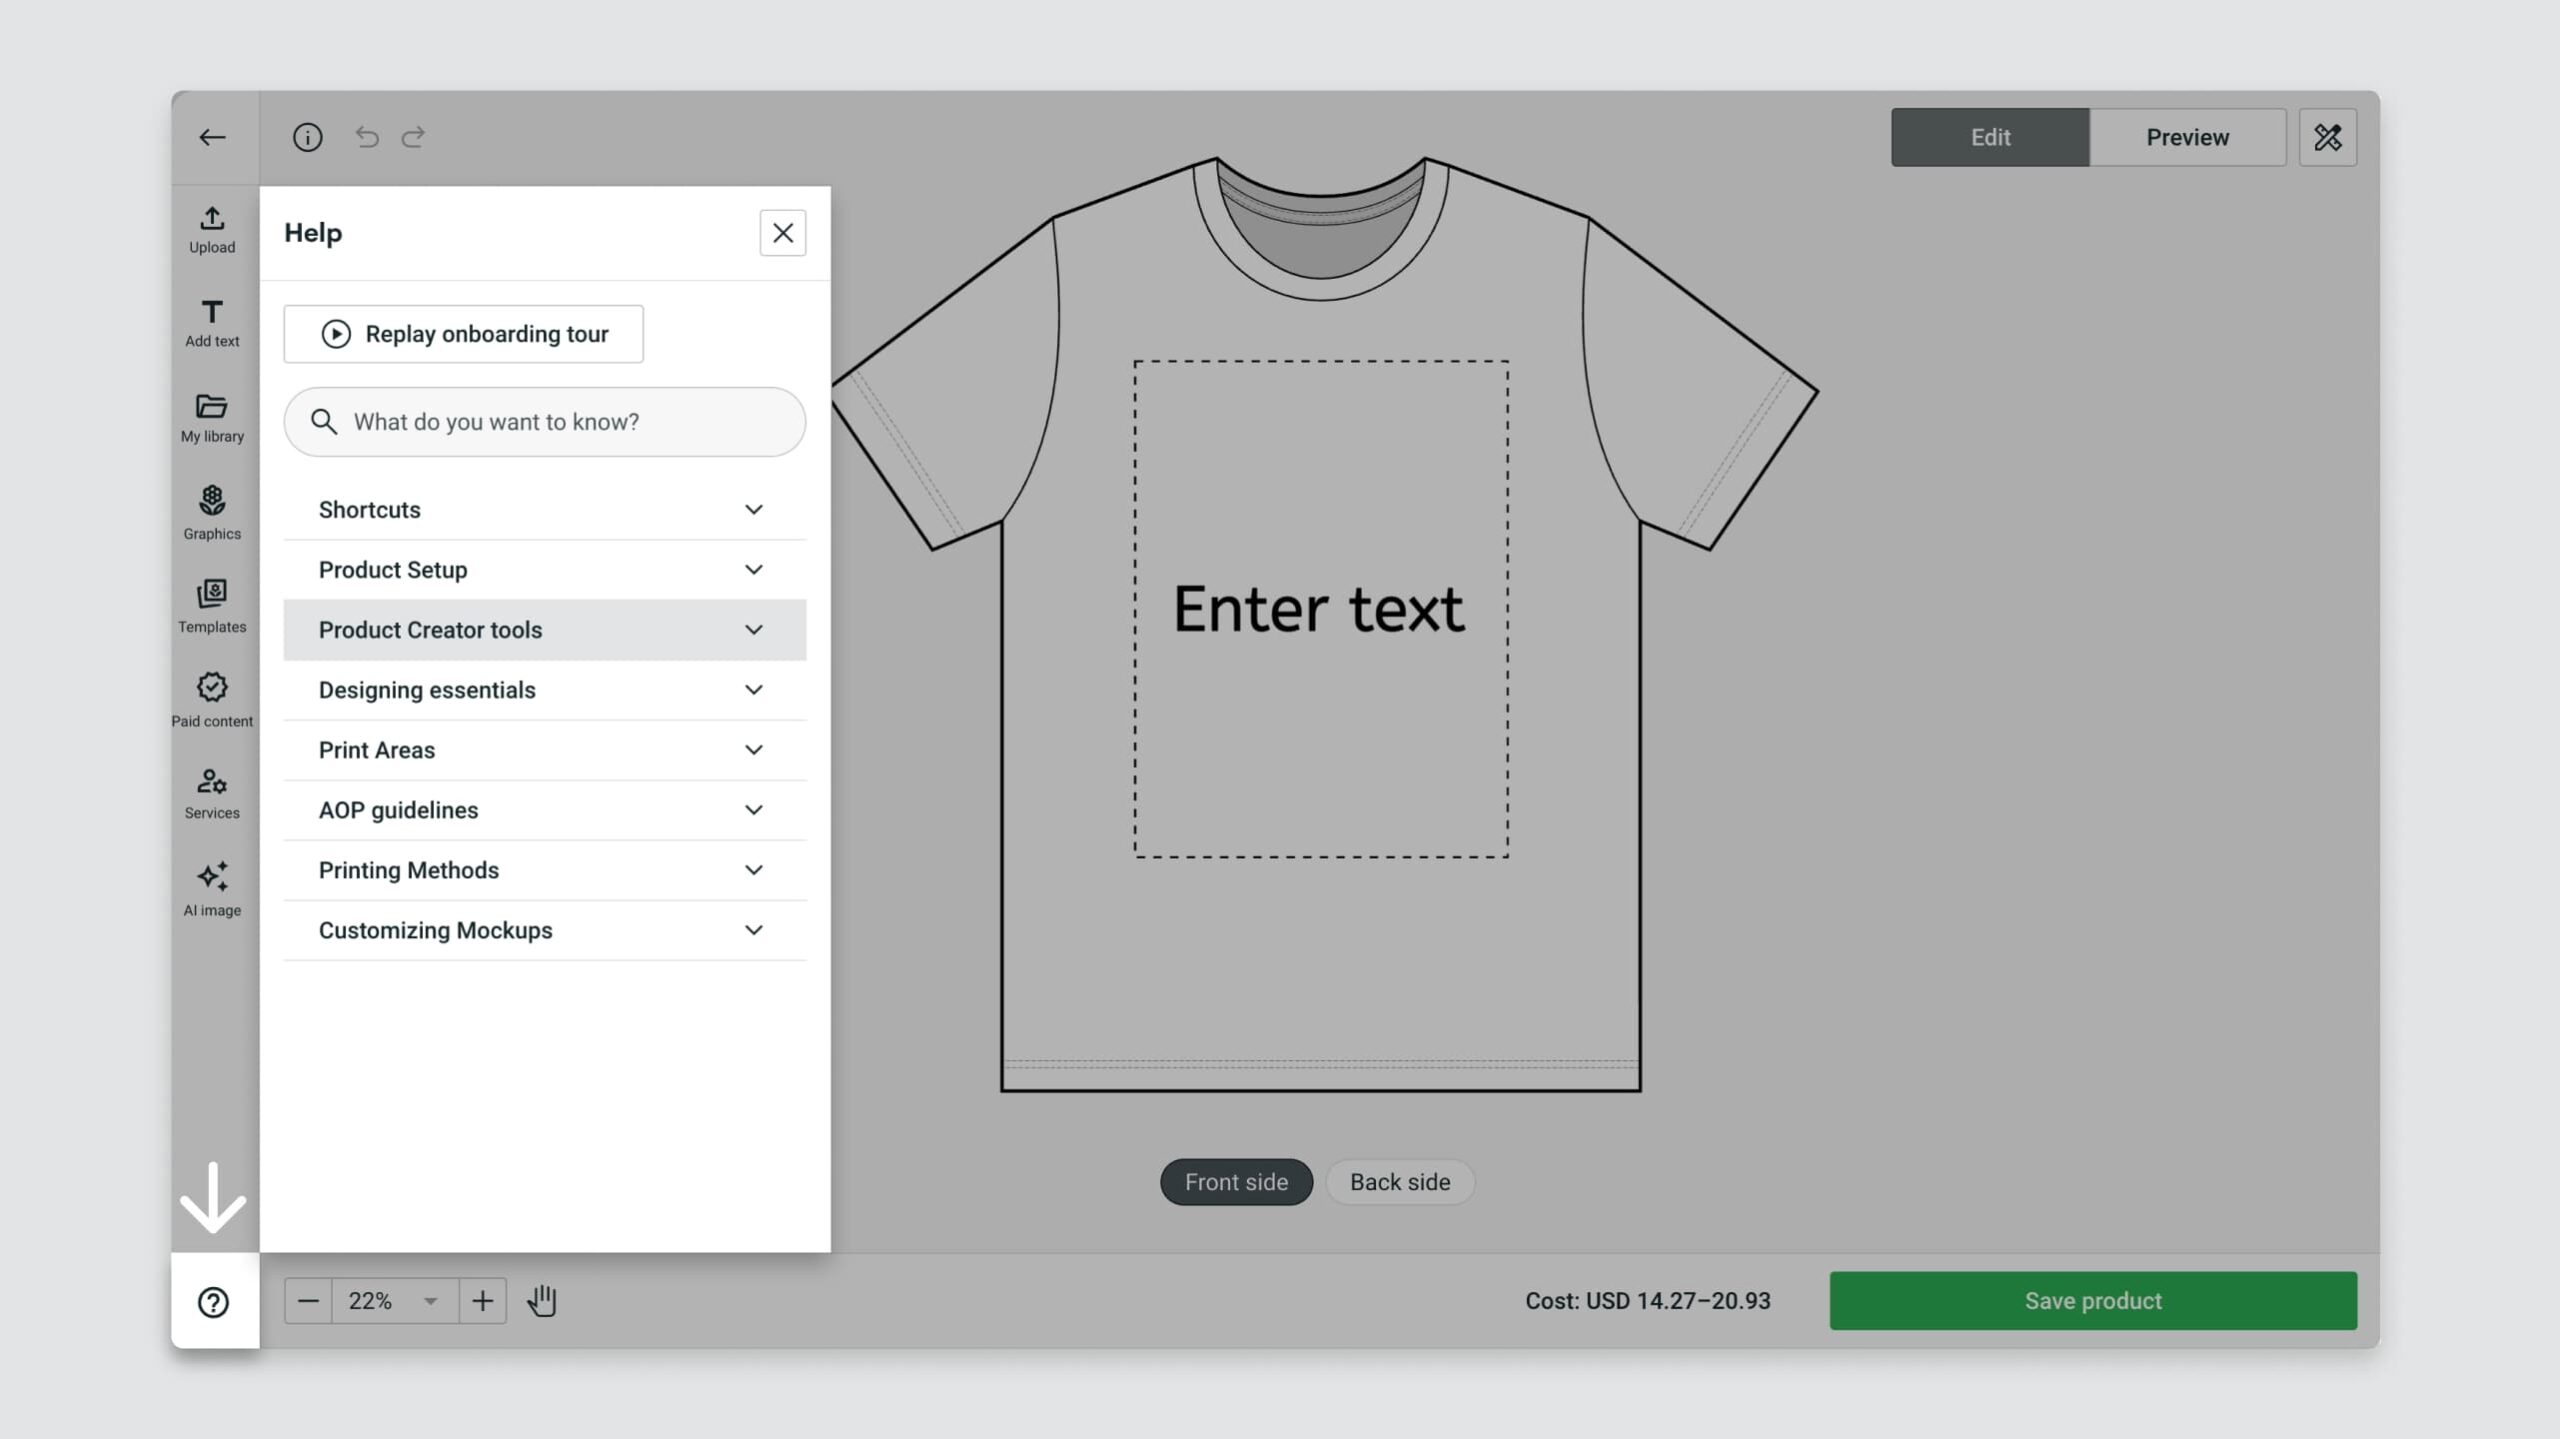 The Help section and guided onboarding tour section in Printify's Product Creator.